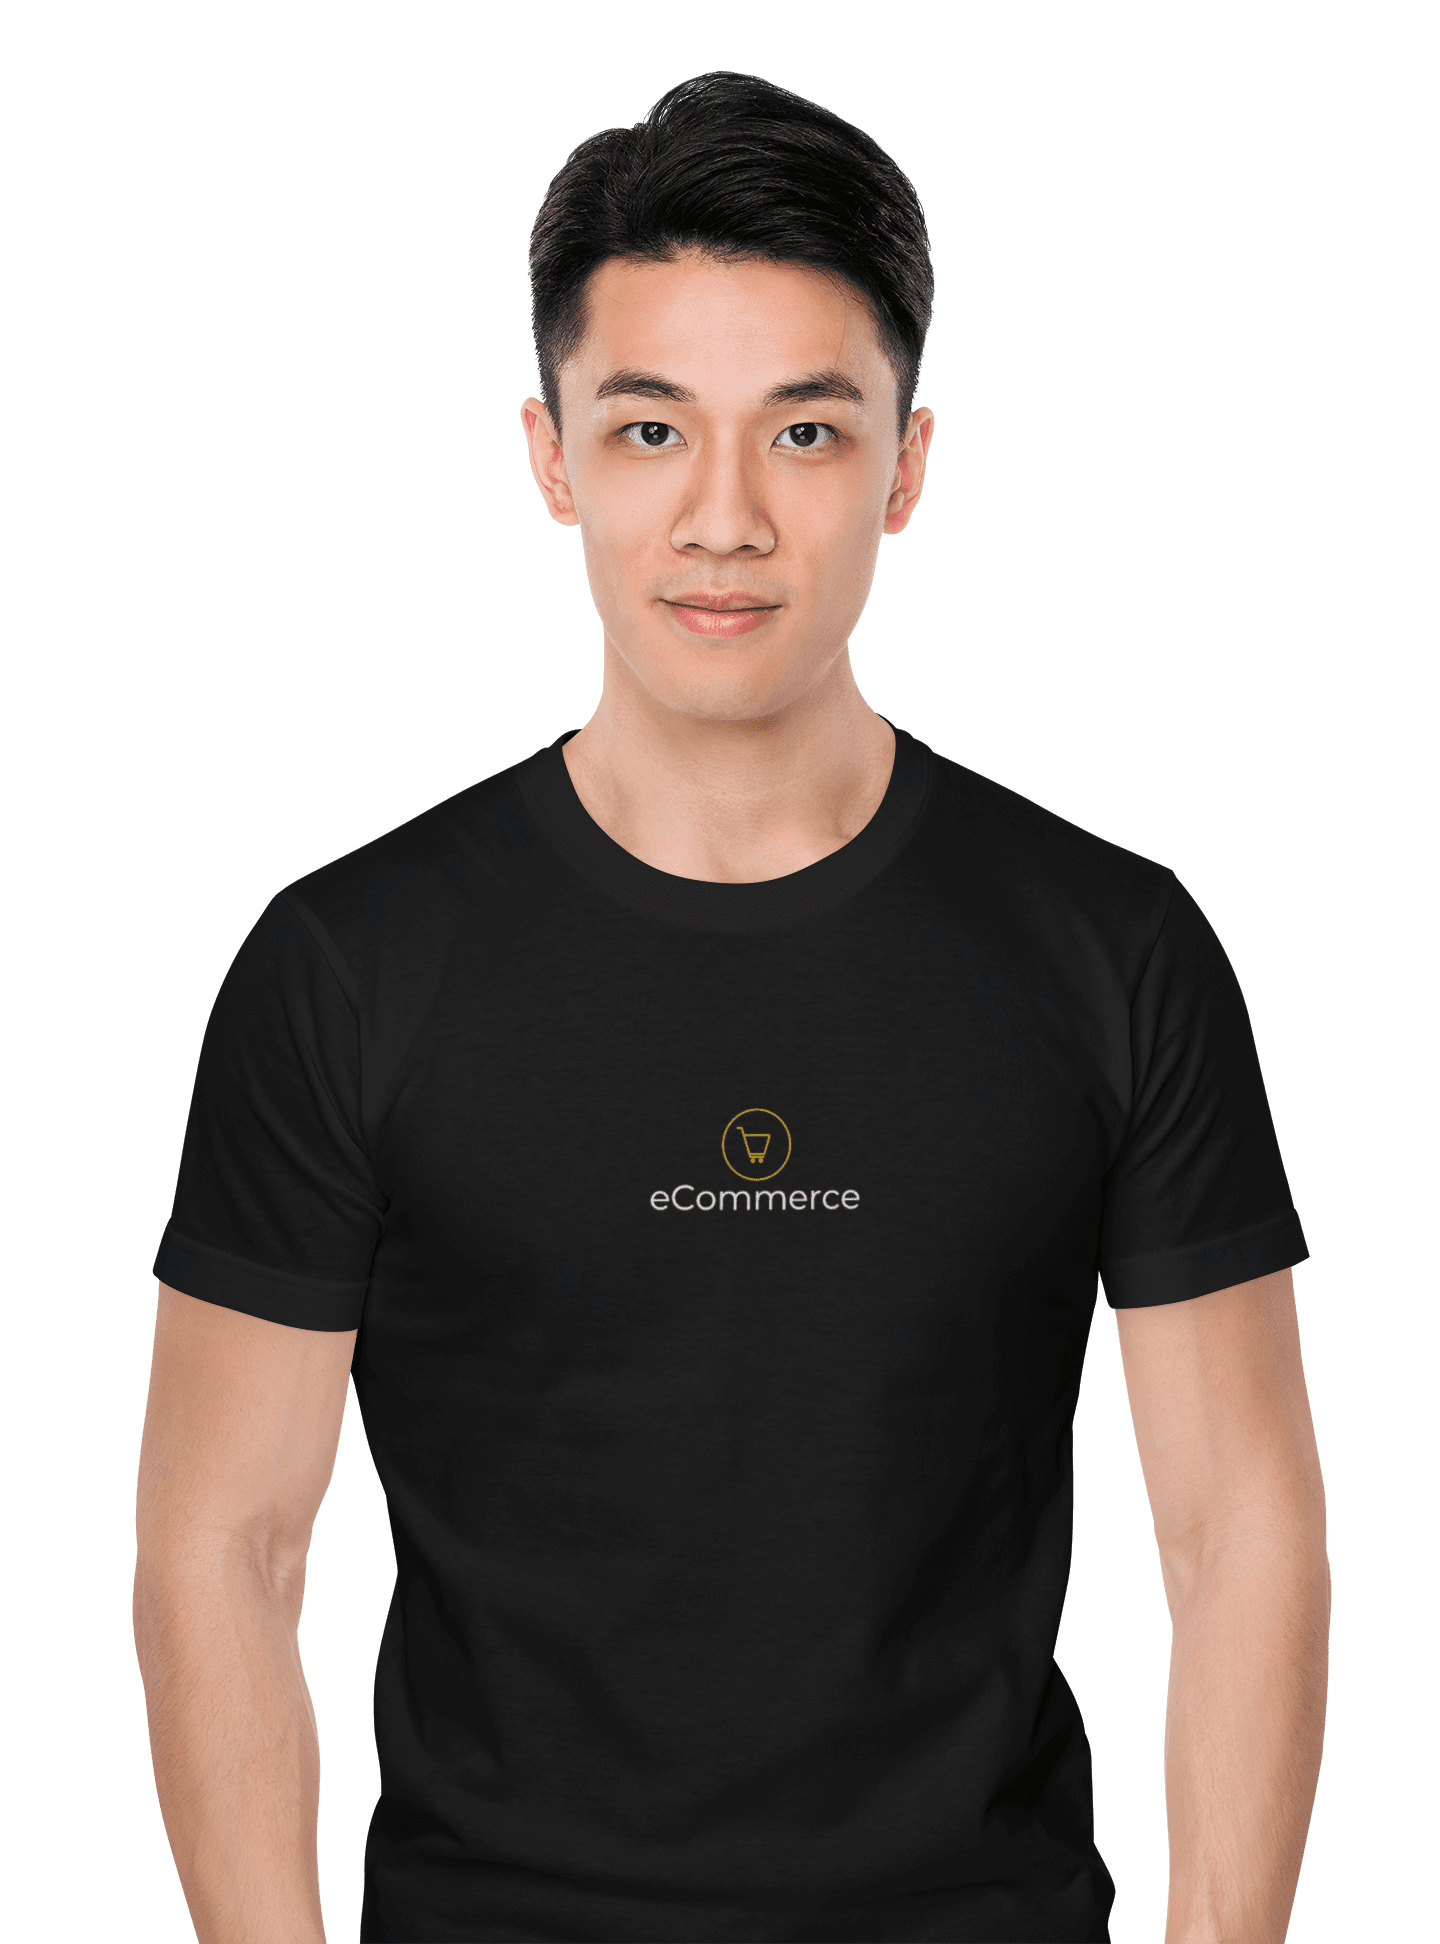 man in ecommerce shirt